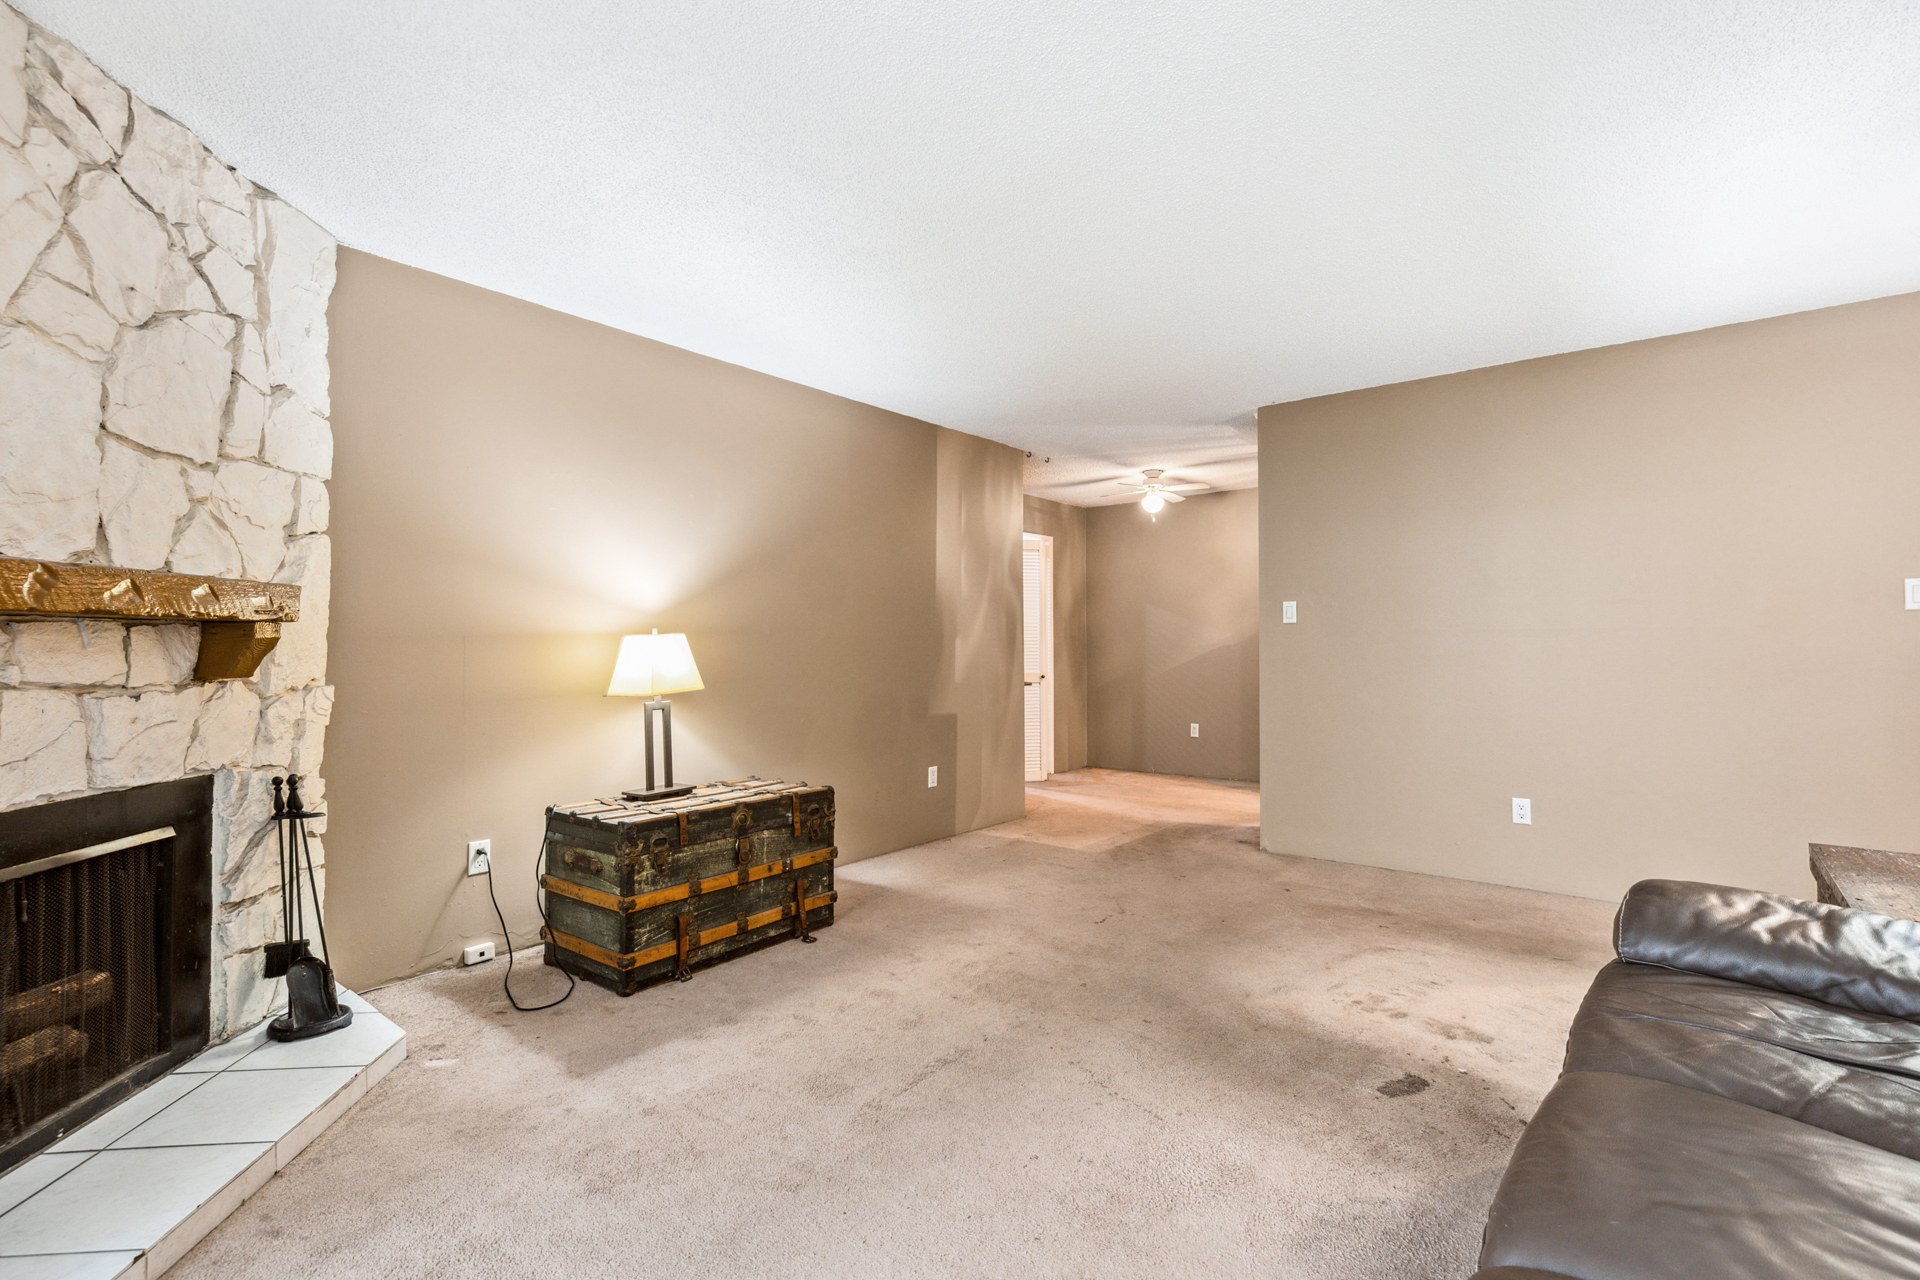 102 141 West 13th Street, North Vancouver - Rossetti Real Estate Team - image 3